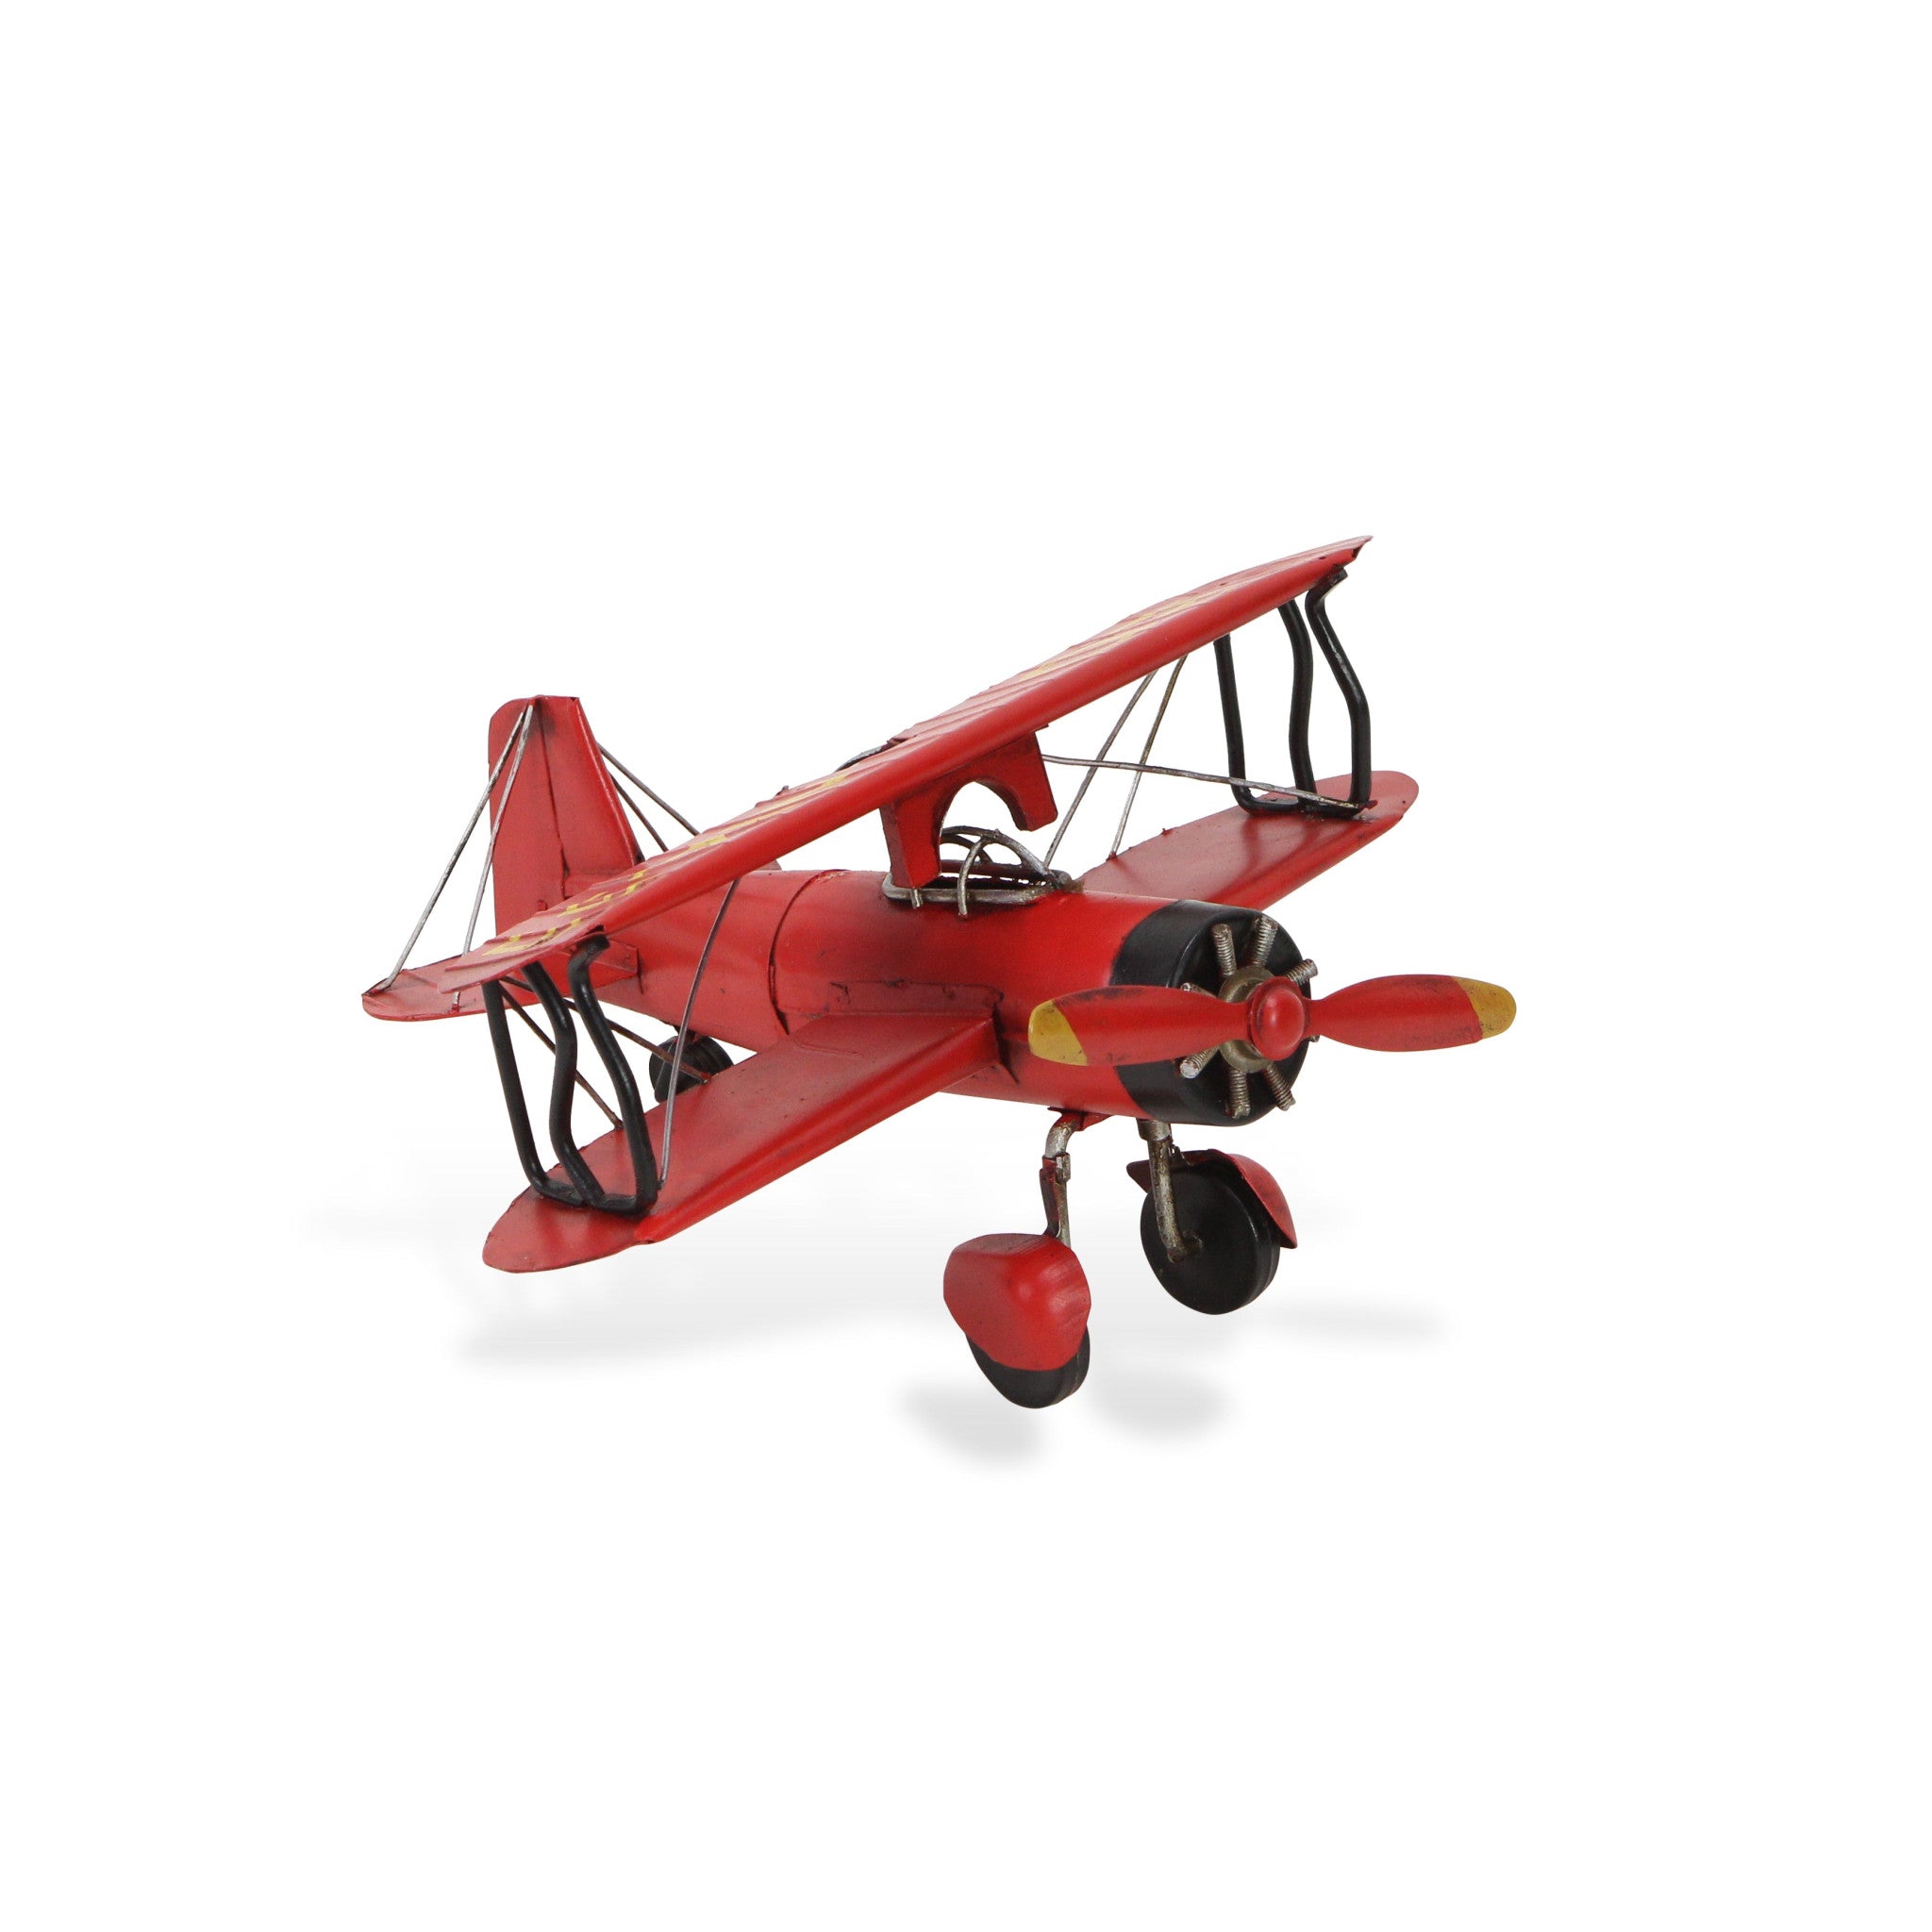 5" Red and Black Metal Hand Painted Model Airplane